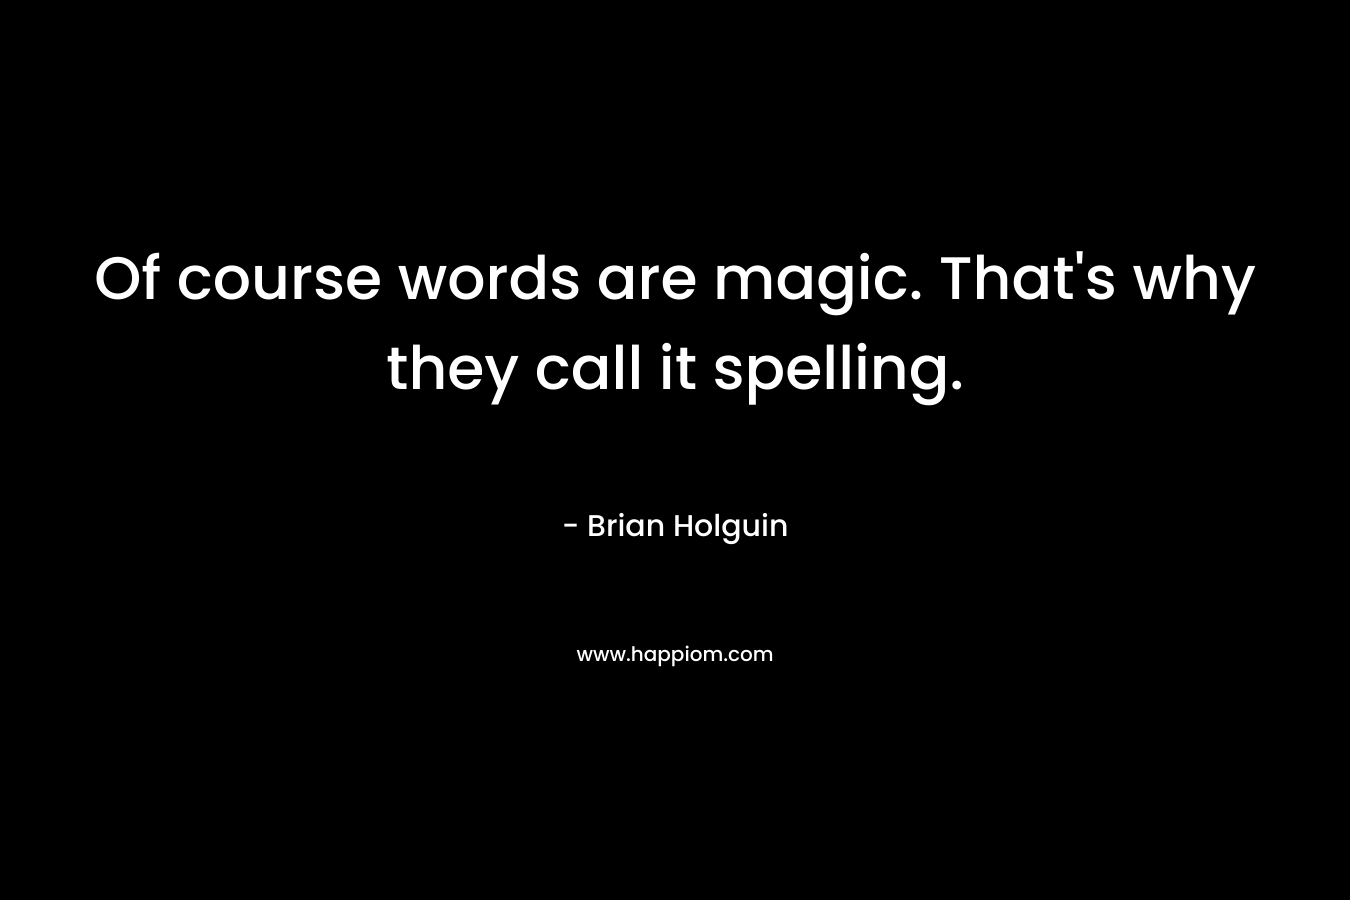 Of course words are magic. That’s why they call it spelling. – Brian Holguin